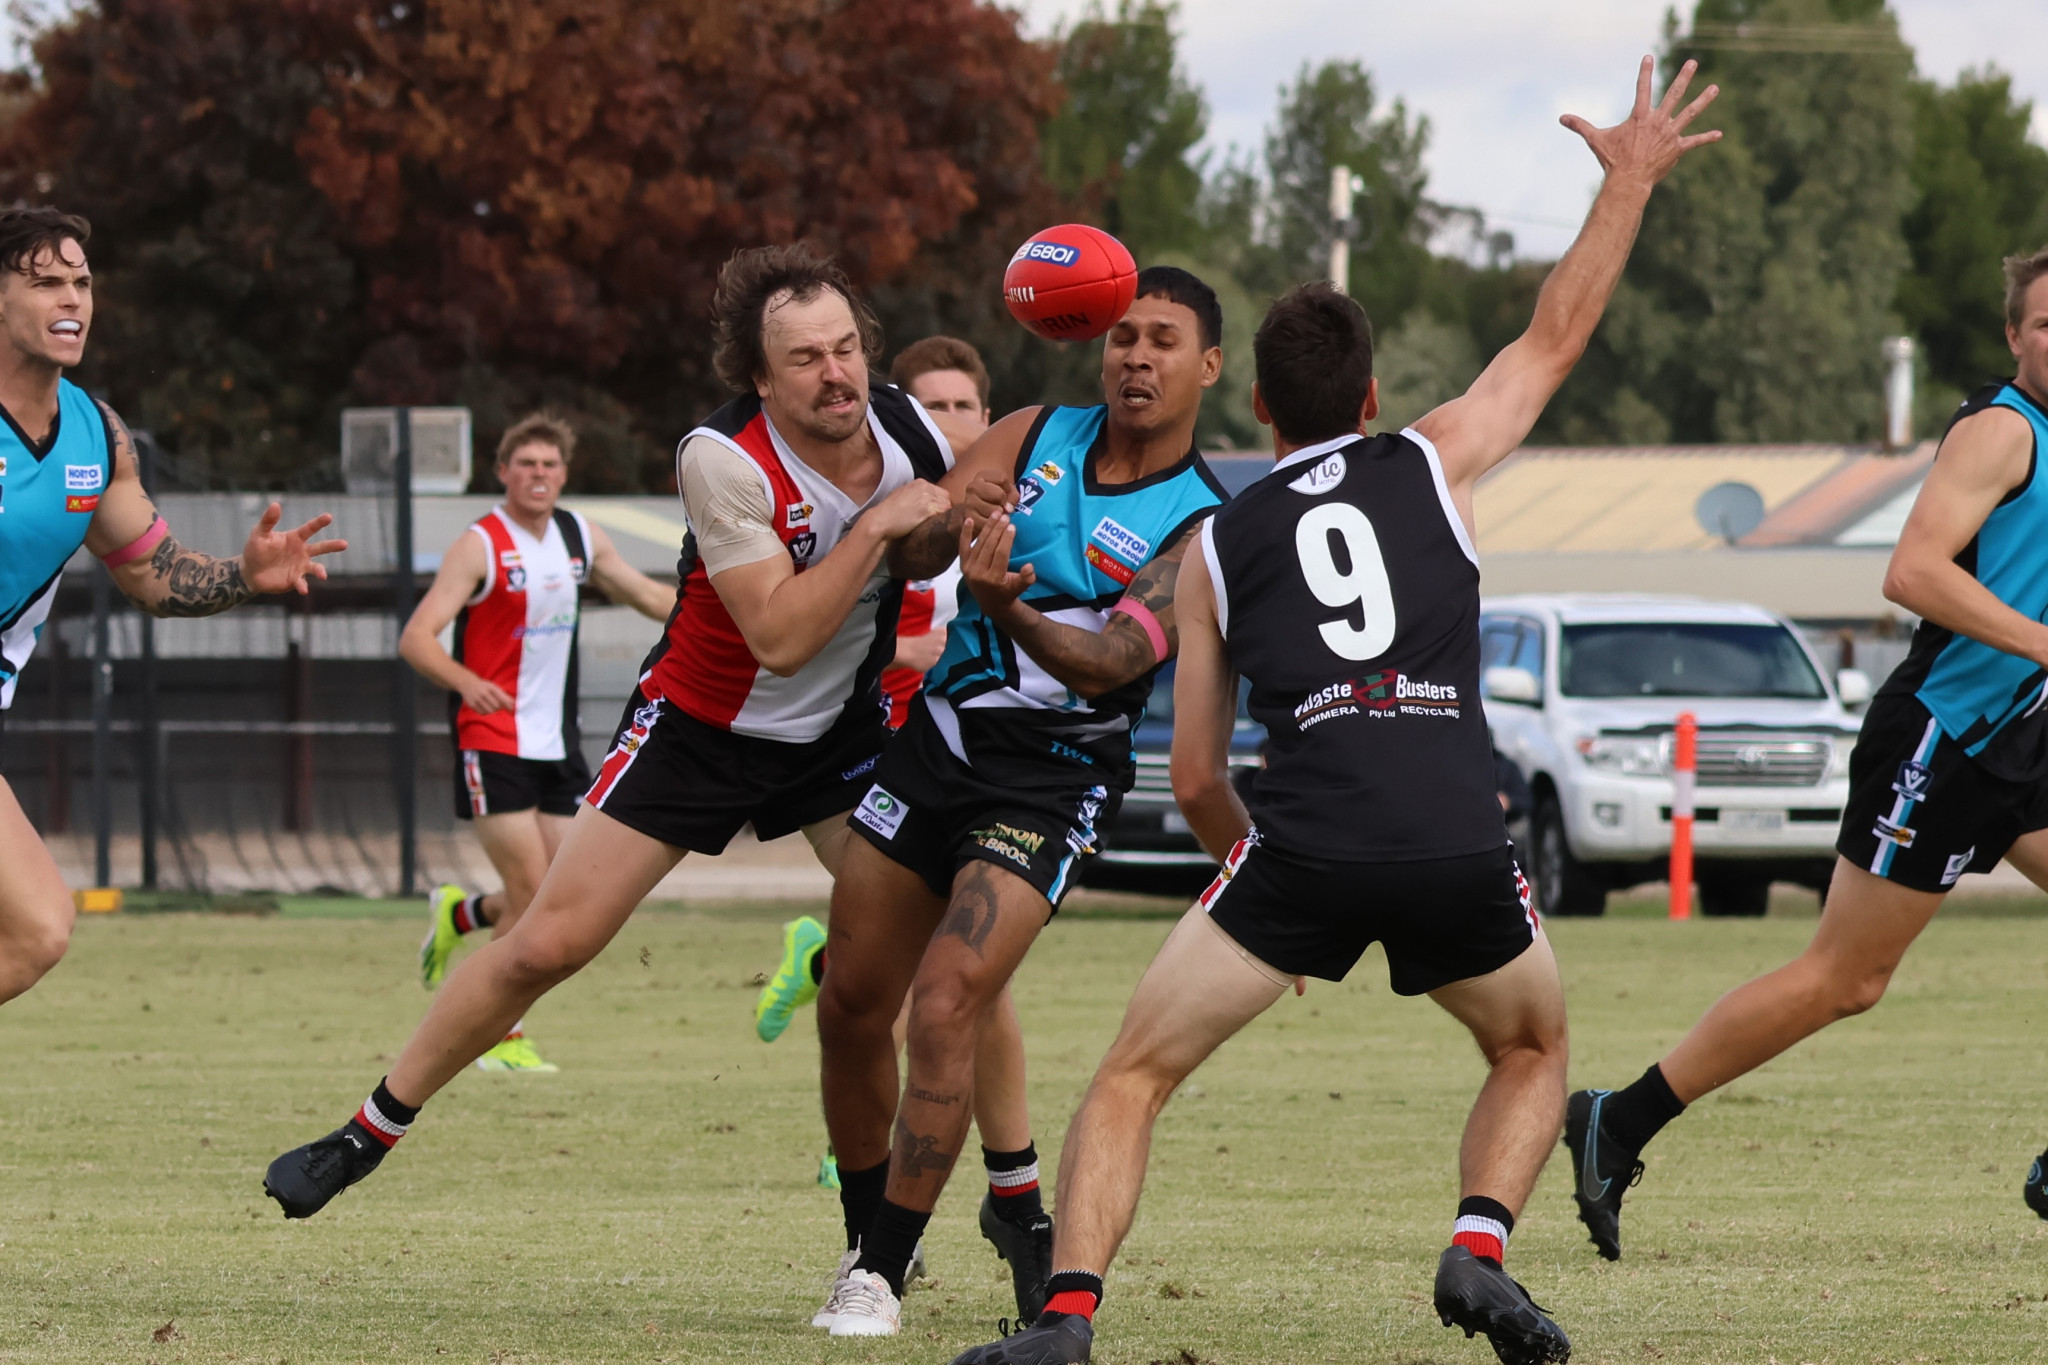 Nick Yarran returned in style in his first game last week kicking three goals. PHOTO: LES GRAETZ